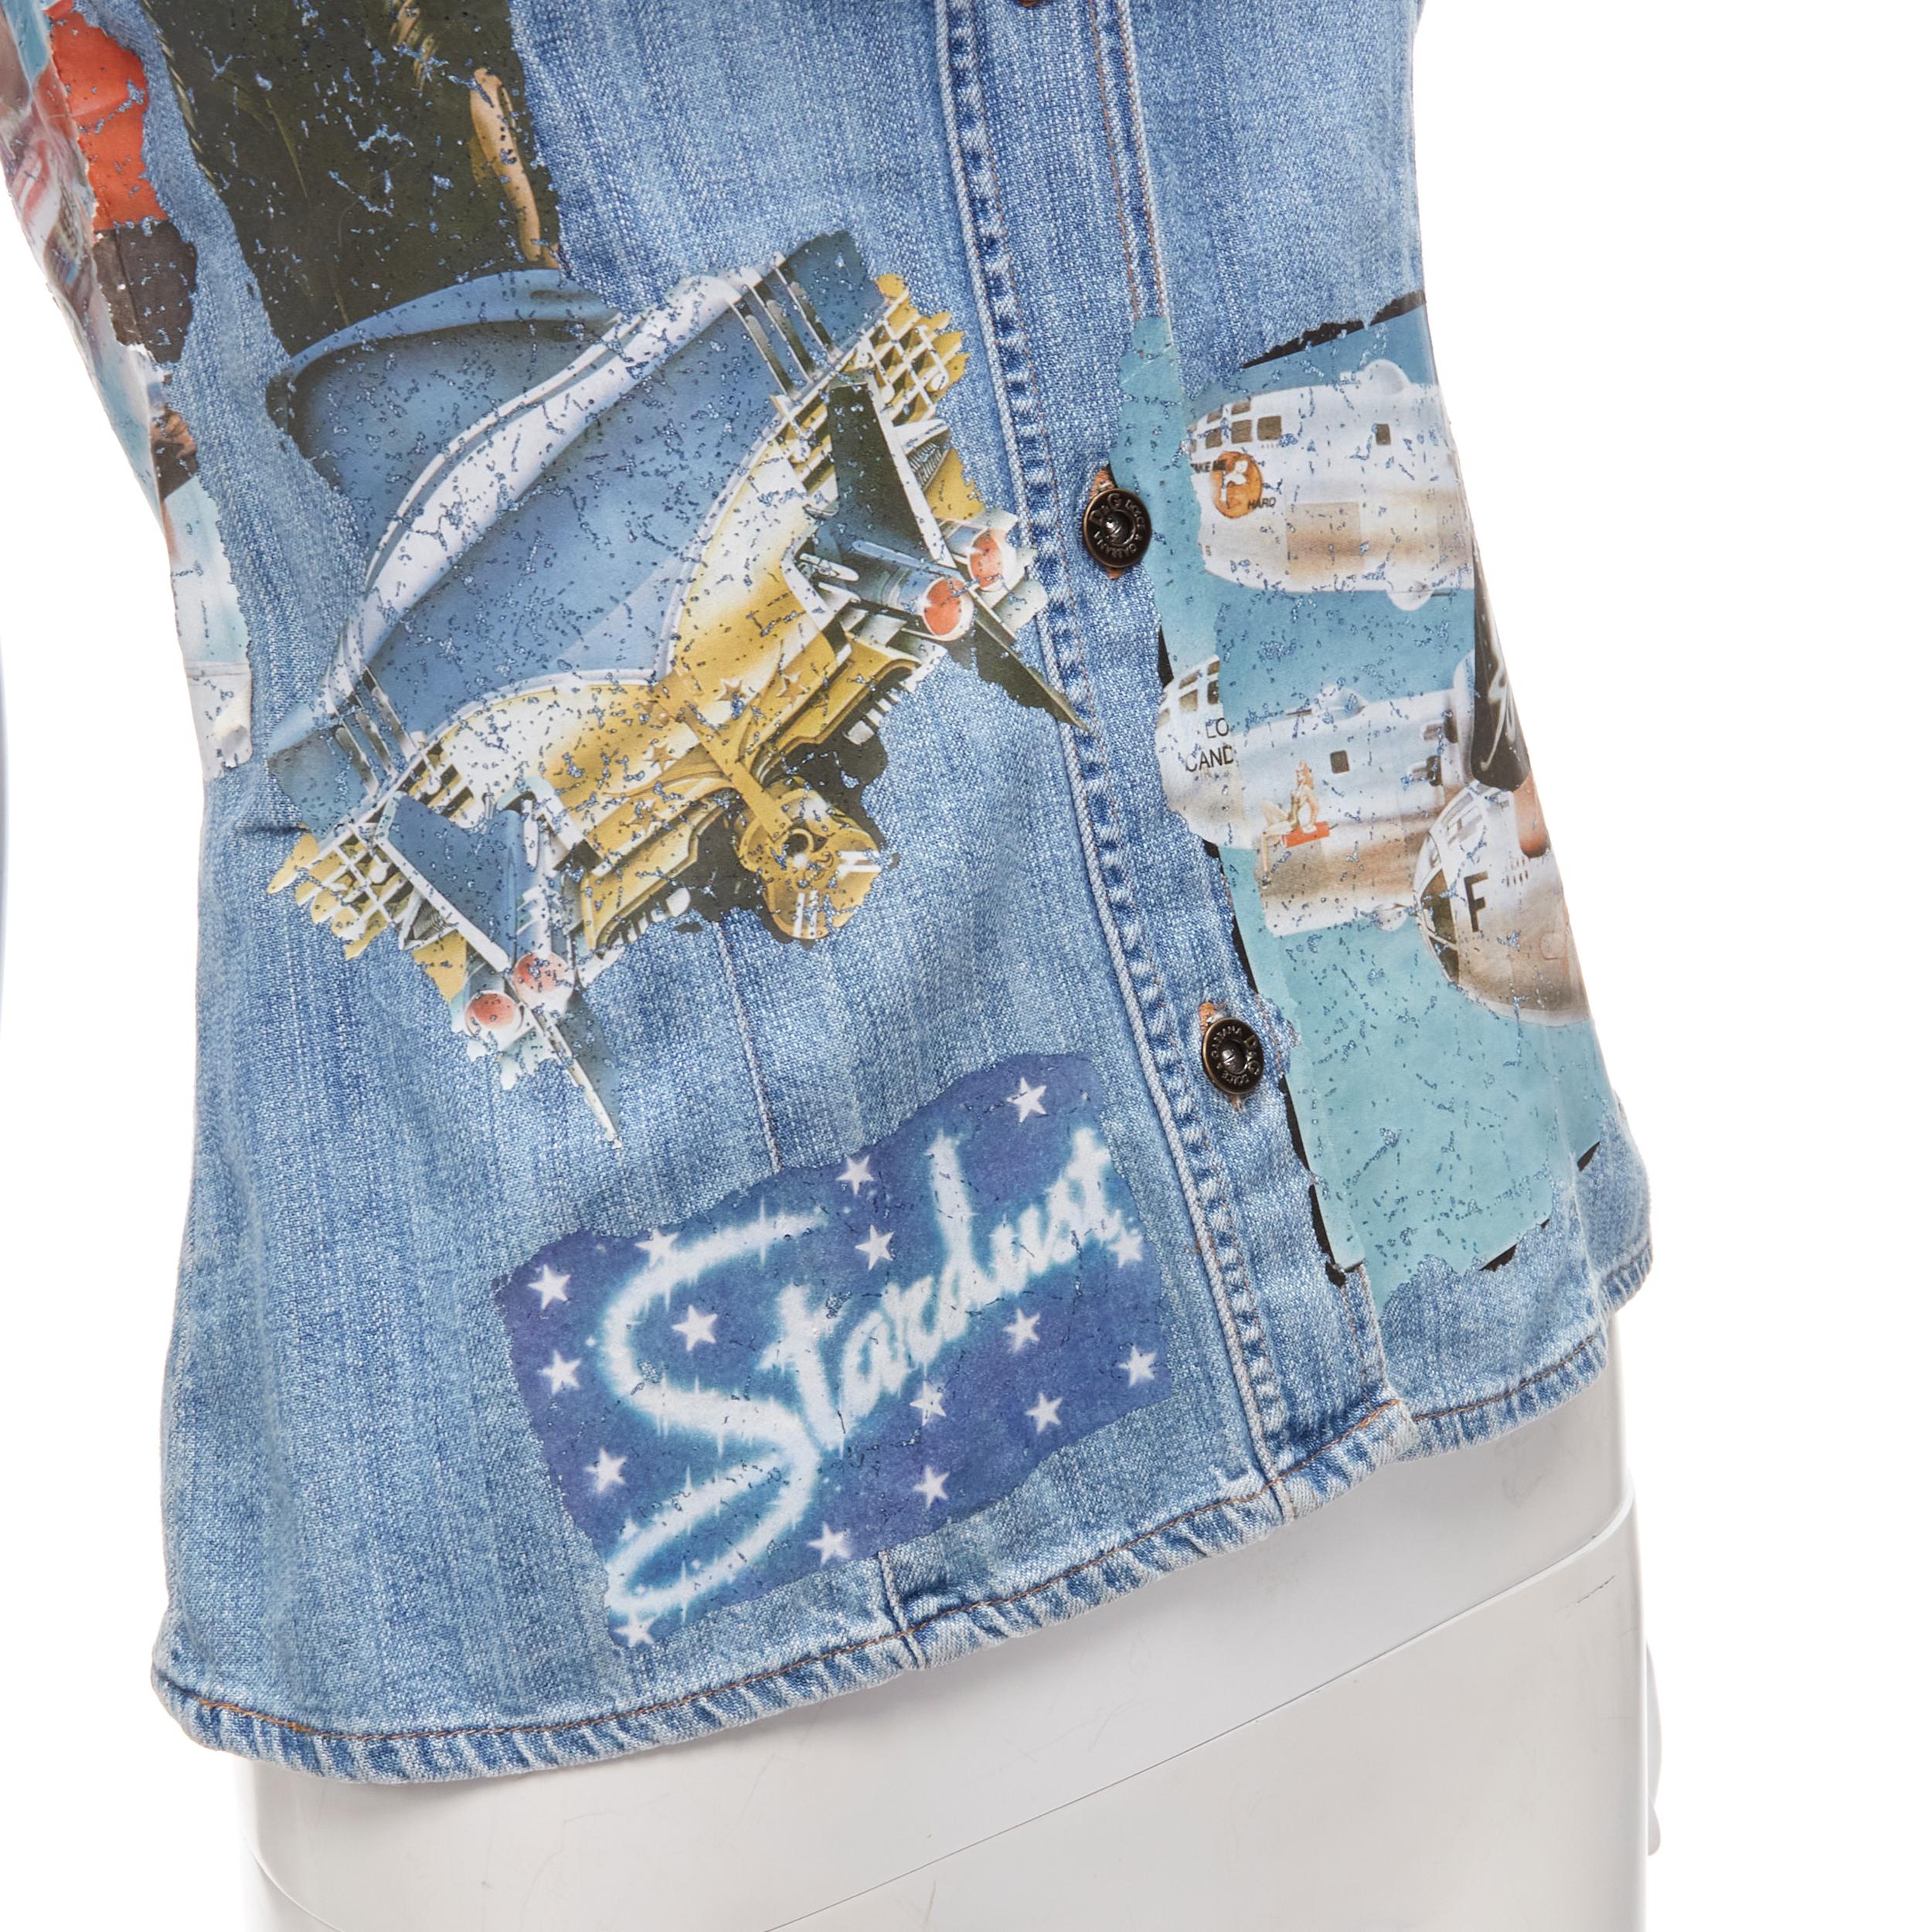 D&G DOLCE GABBANA Vintage Y2K pin up girls retro car denim vest XS 
Reference: ANWU/A00629 
Brand: D&G 
Material: Cotton 
Color: Blue 
Pattern: Pin up girls 
Closure: Button 
Extra Detail: Distressed patched print for vintage effect. Button front